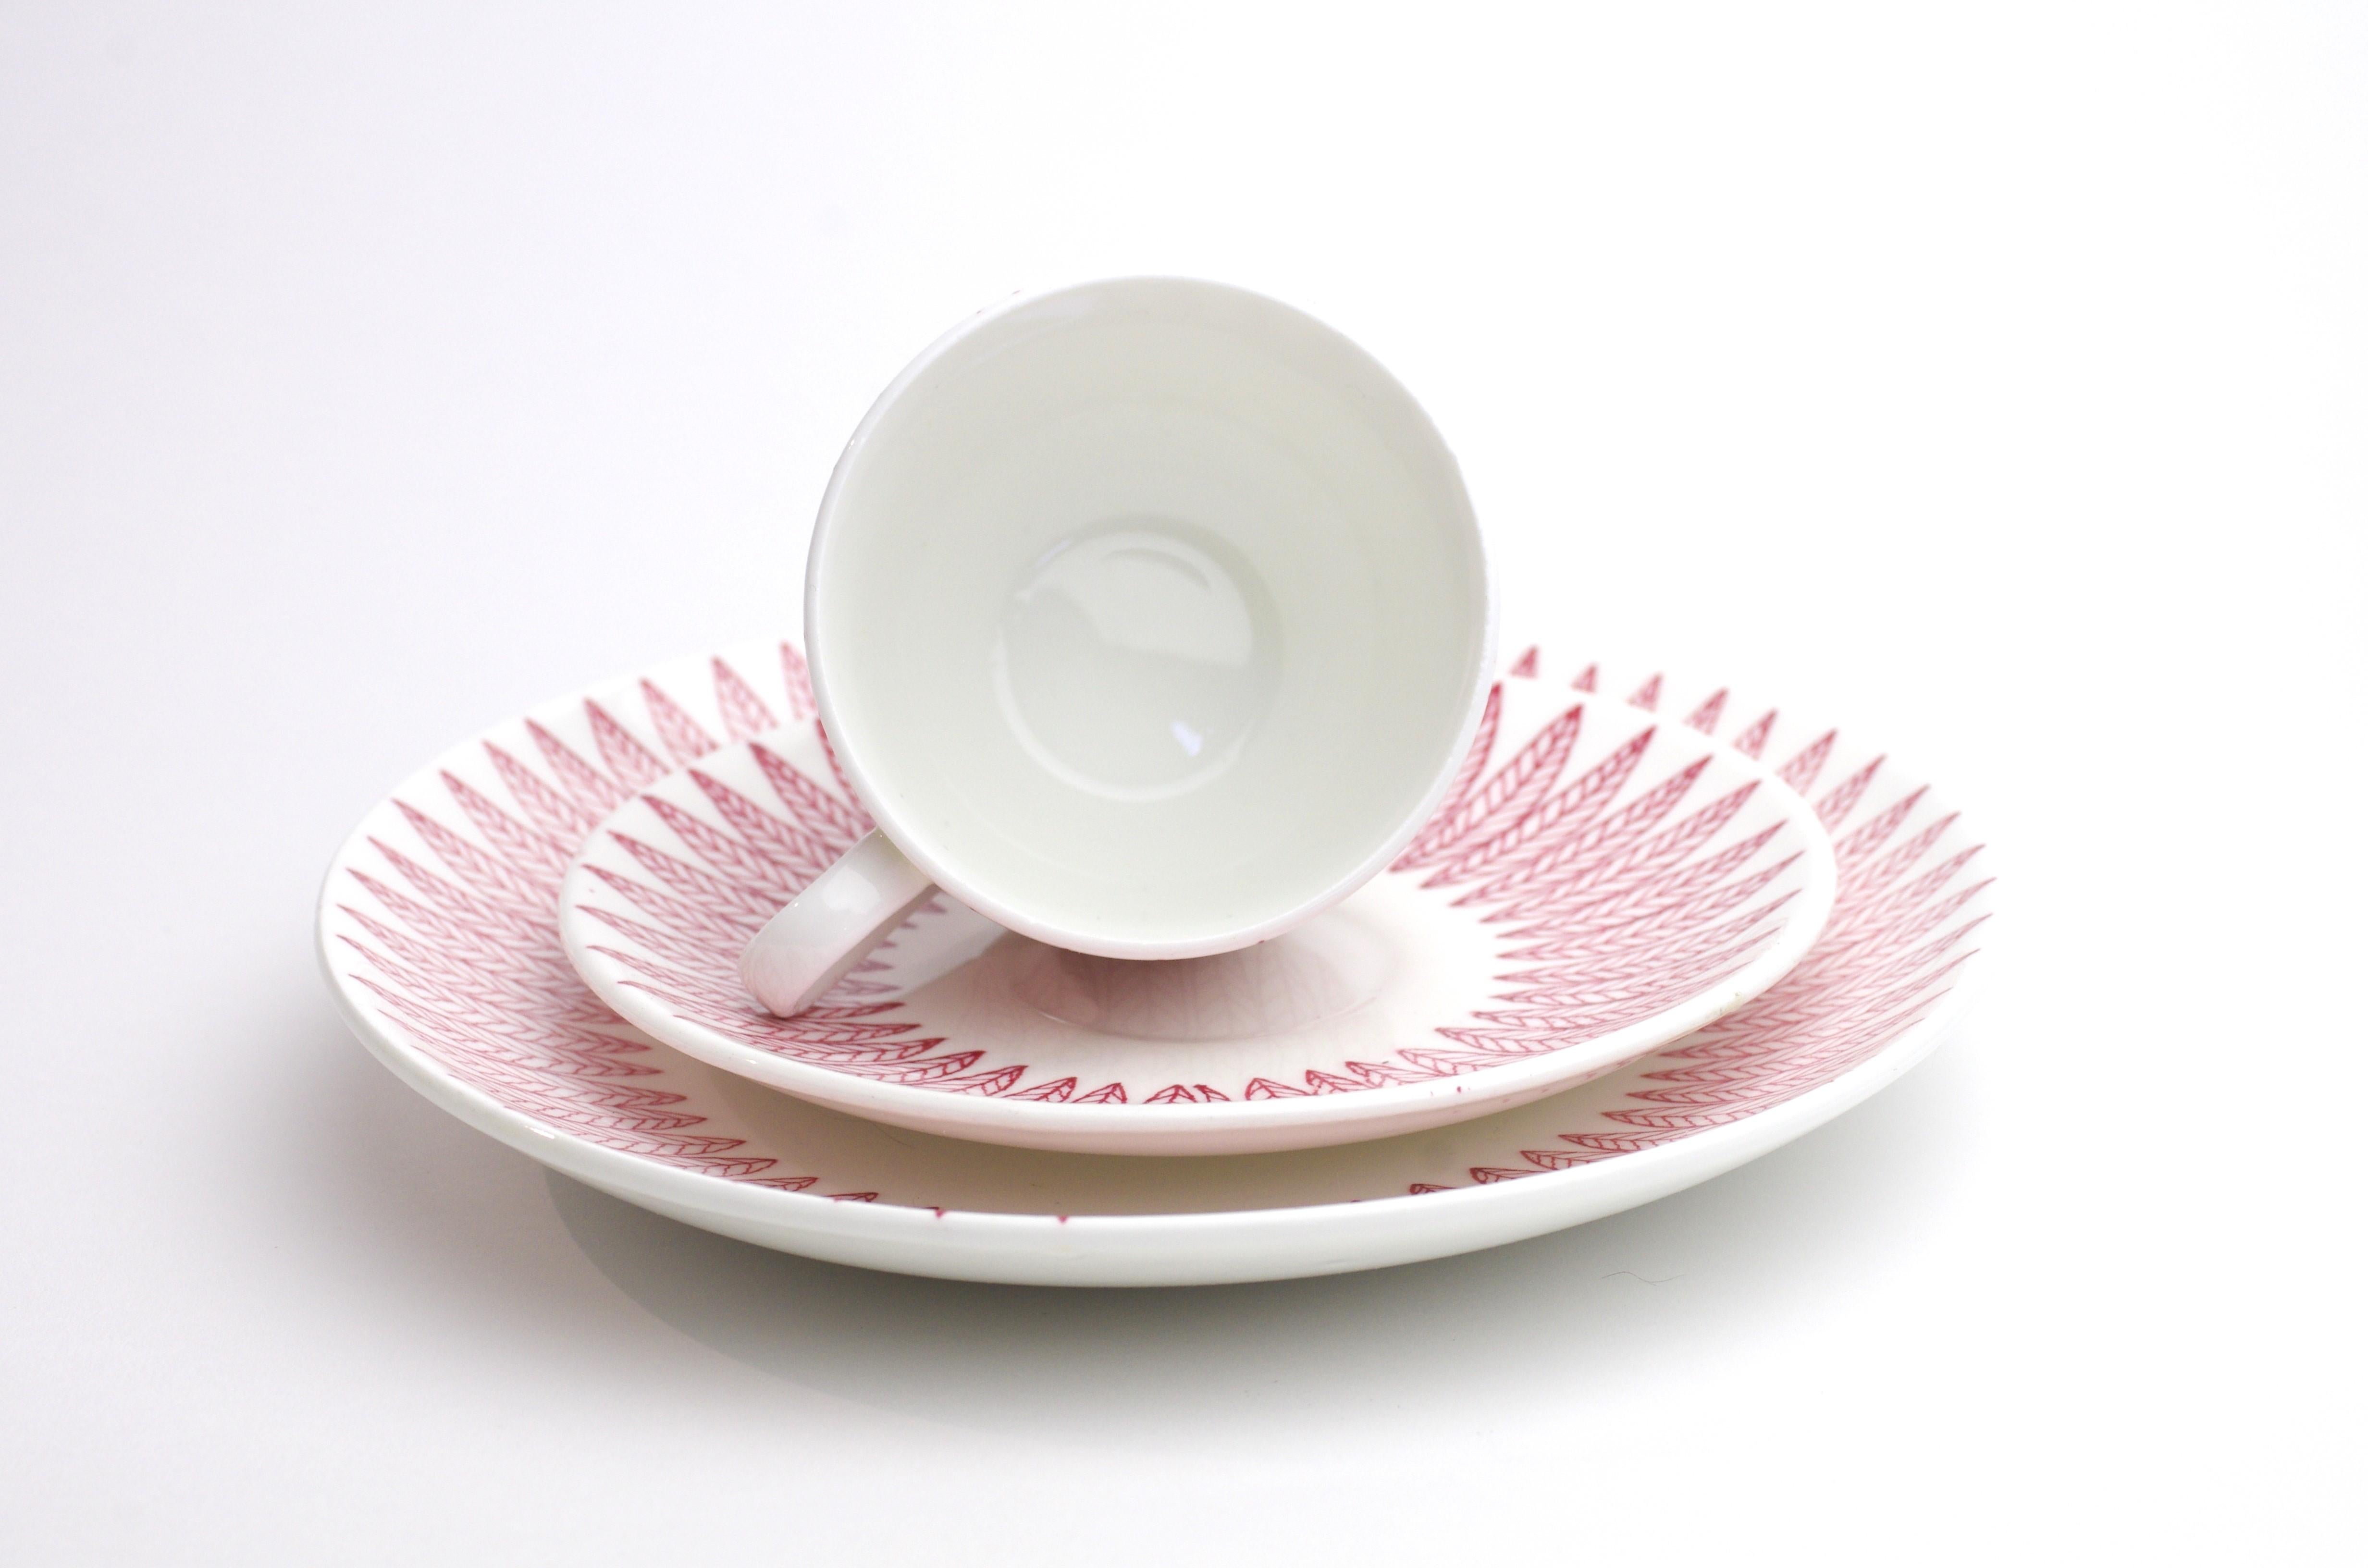 Product Description:
This popular series called Salix, designed by Stig Lindberg for Gustavsberg, draws attention due to the delicate lines drawn on the pure white and transparent bone china. Essentially this item is co-authored, the form-design